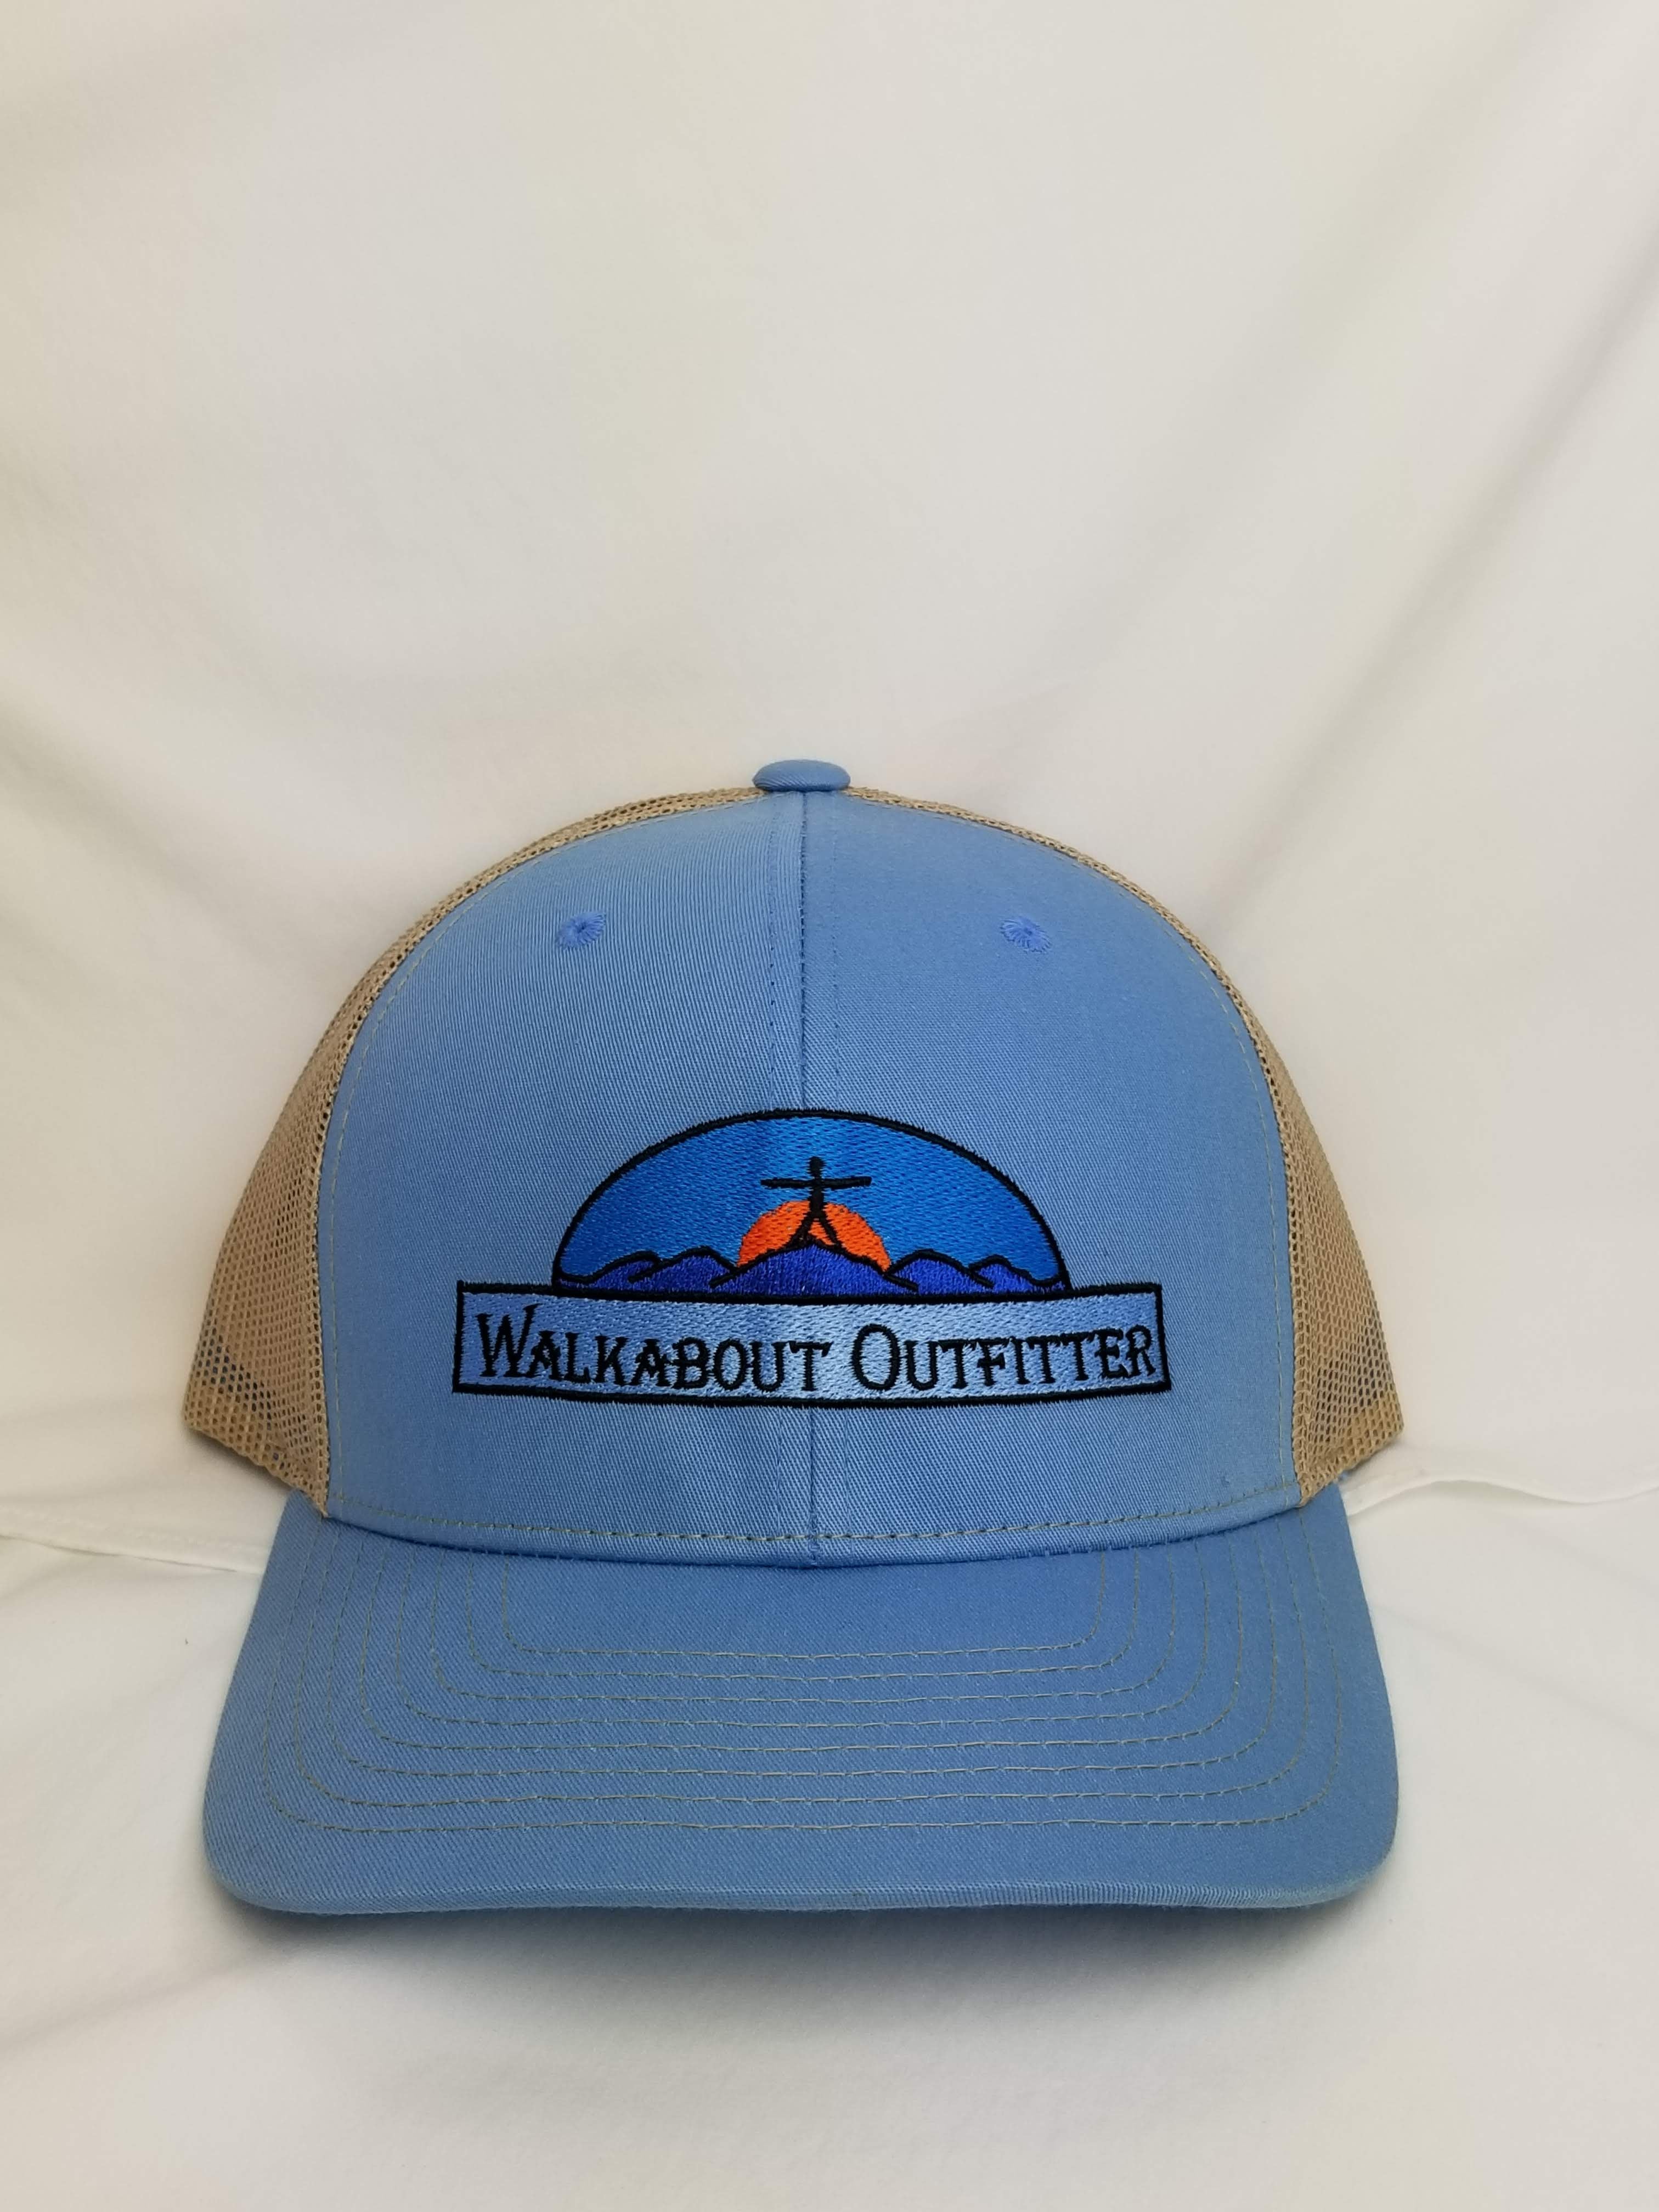 Walkabout Outfitter Walkabout Trucker Hat Blue/Khaki